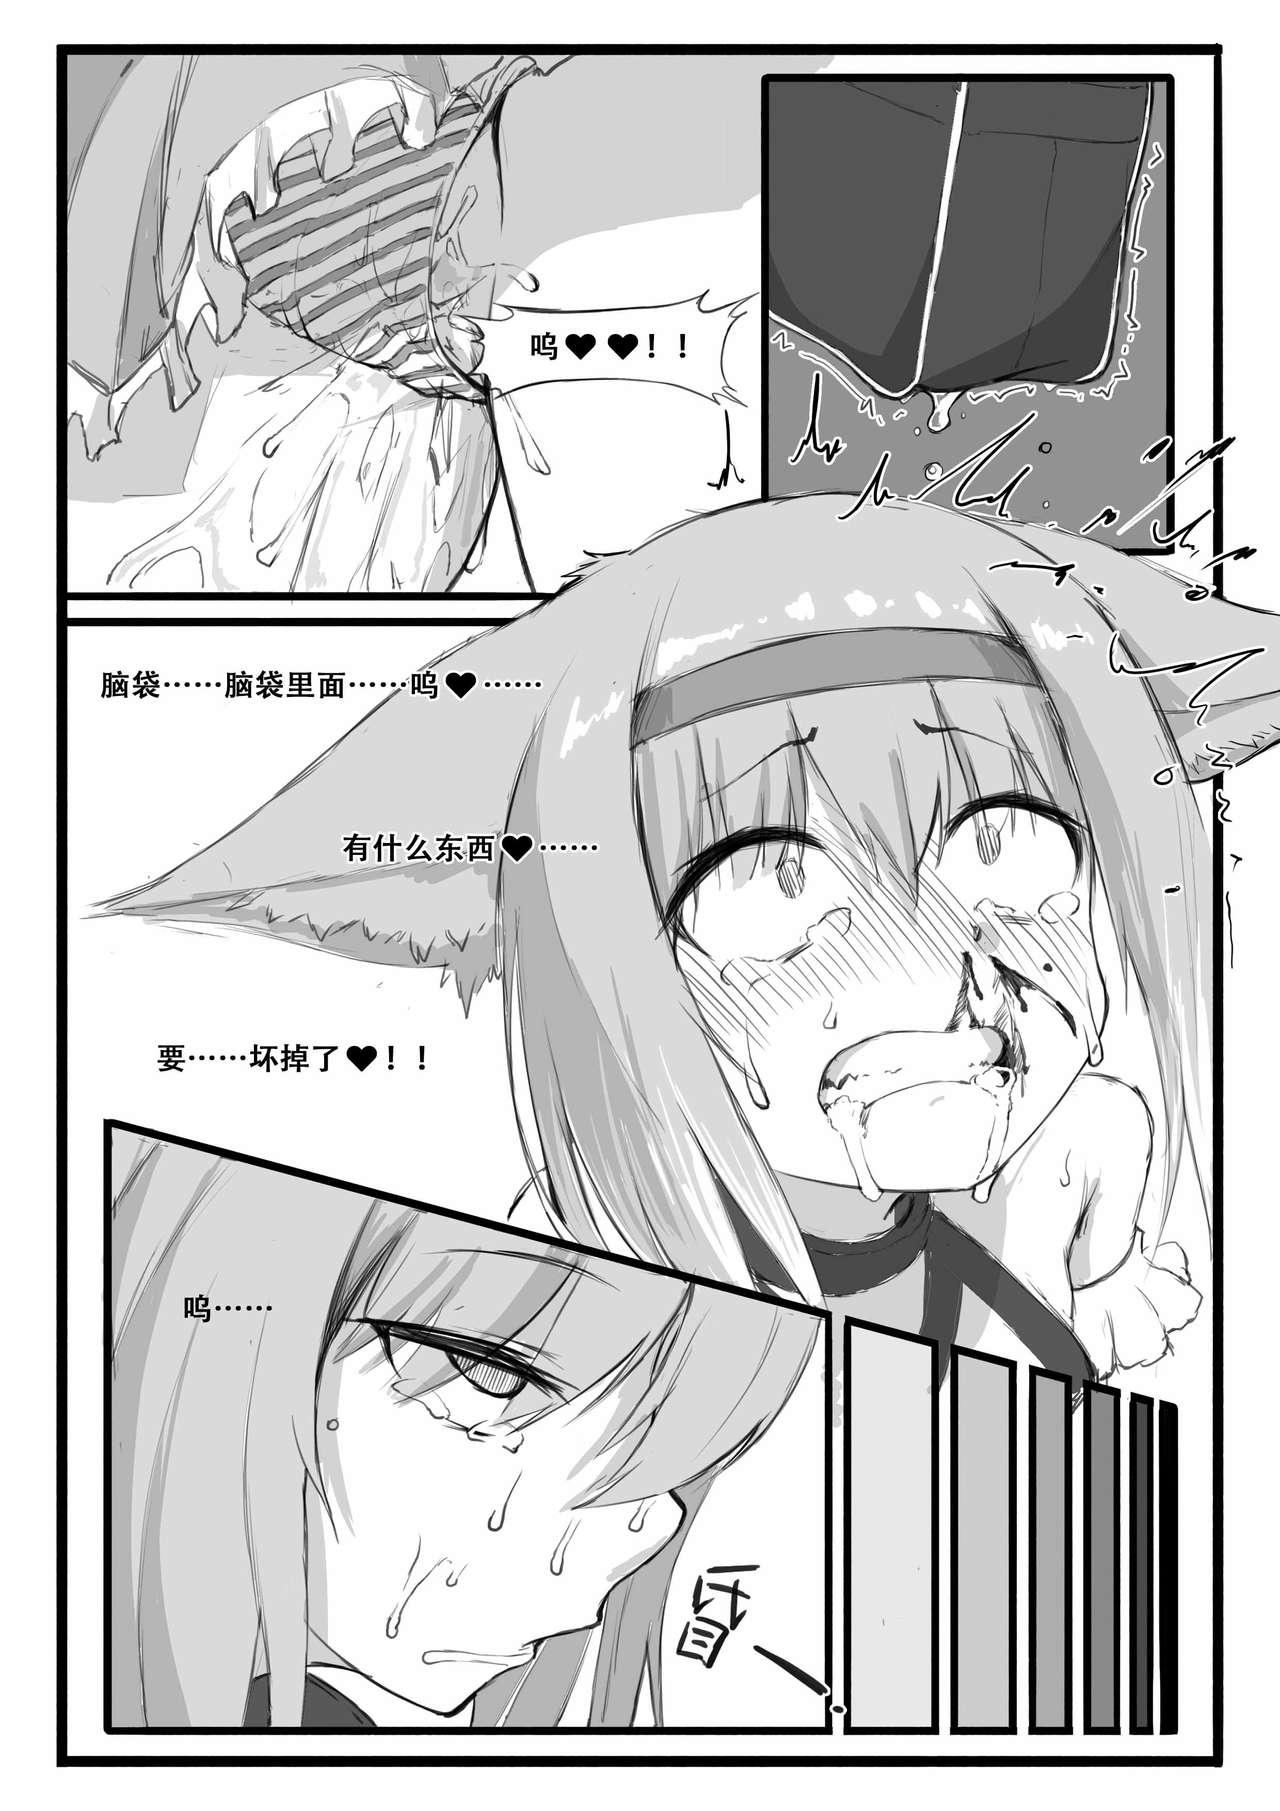 Step 铃兰的单人任务 - Arknights Wives - Page 12